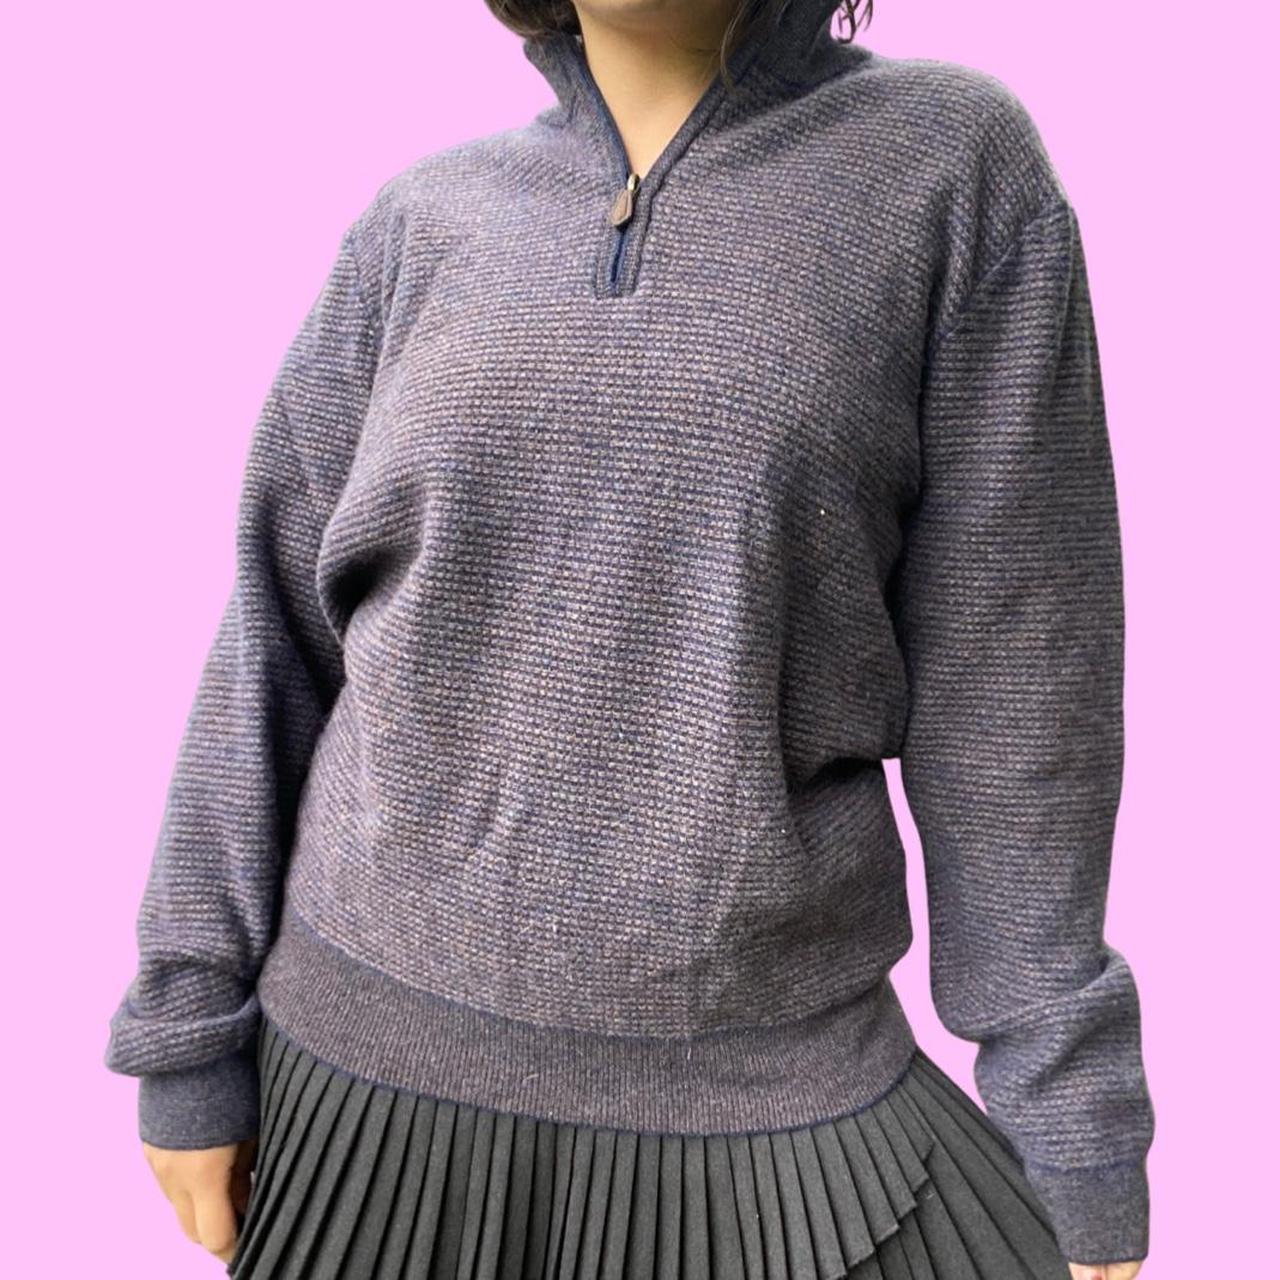 Product Image 1 - wool blend pullover sweater ❄️

this